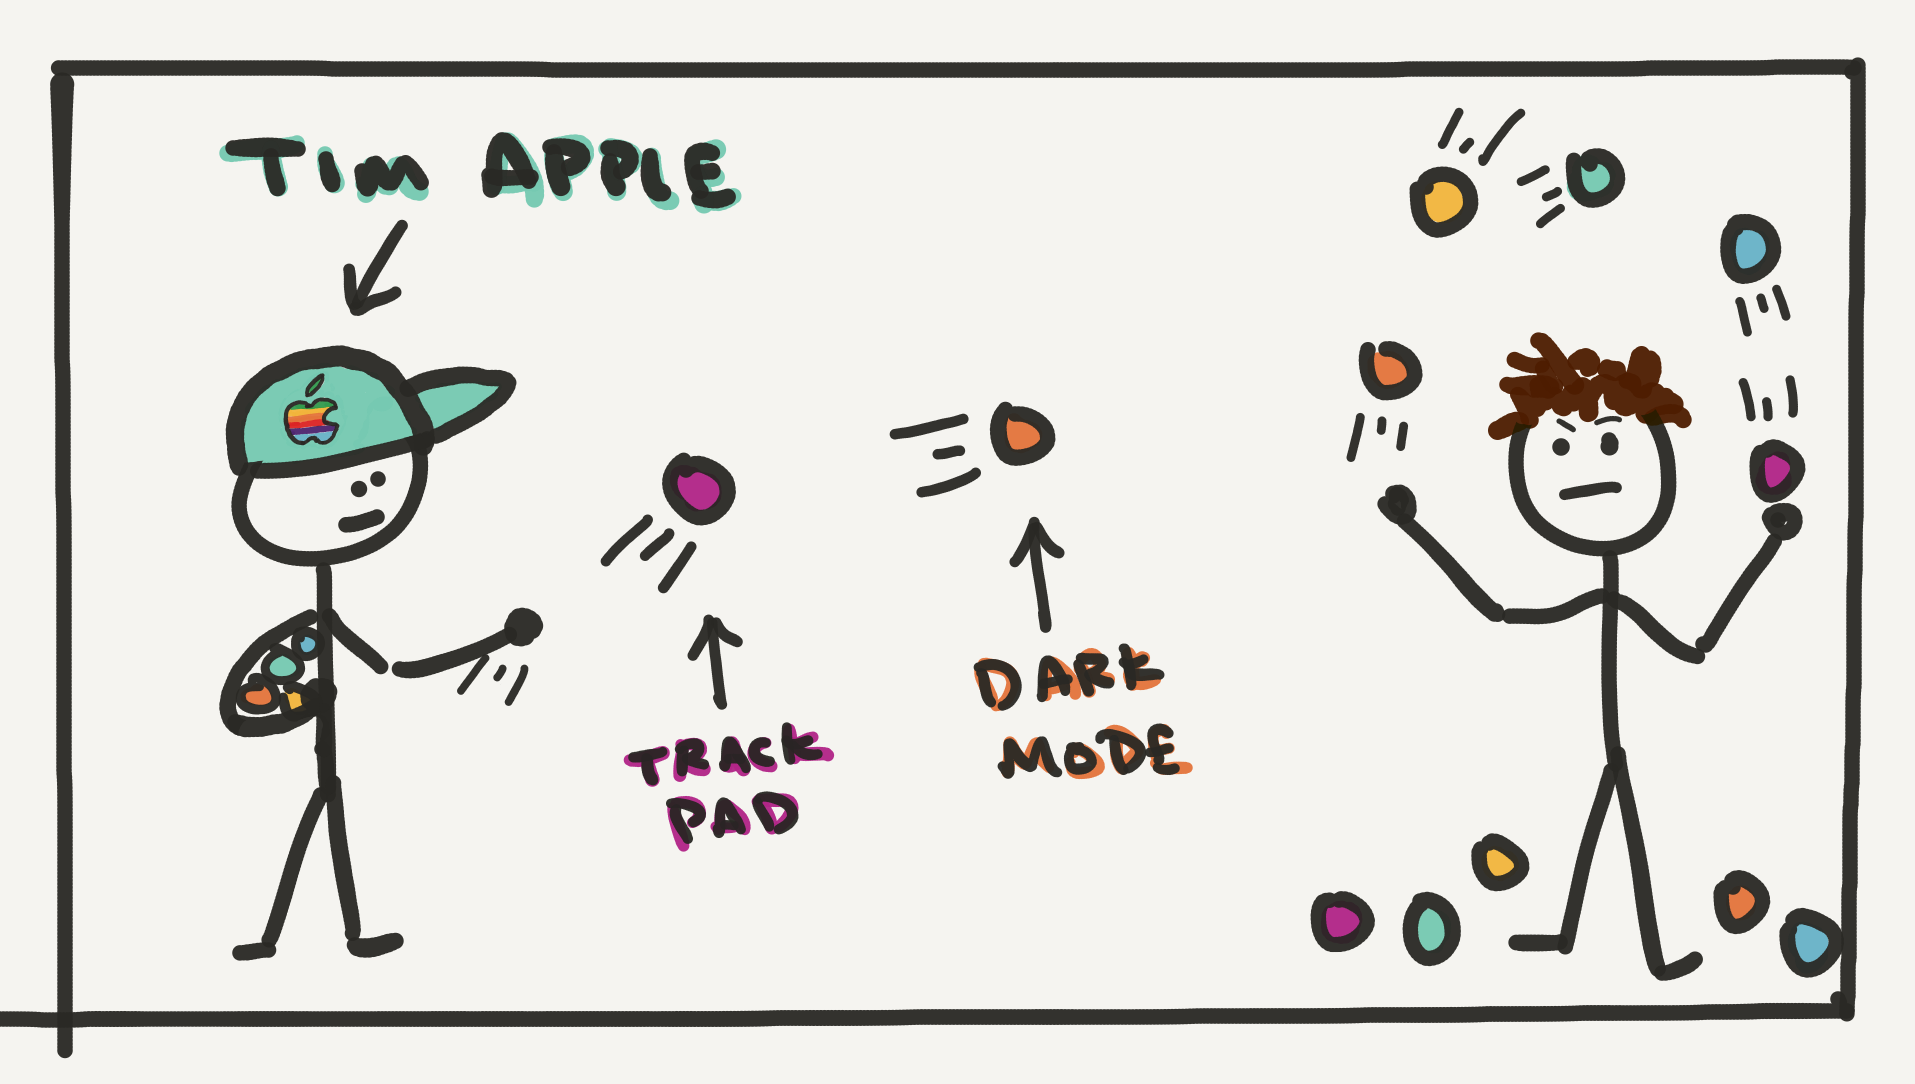 Juggling all the iOS features